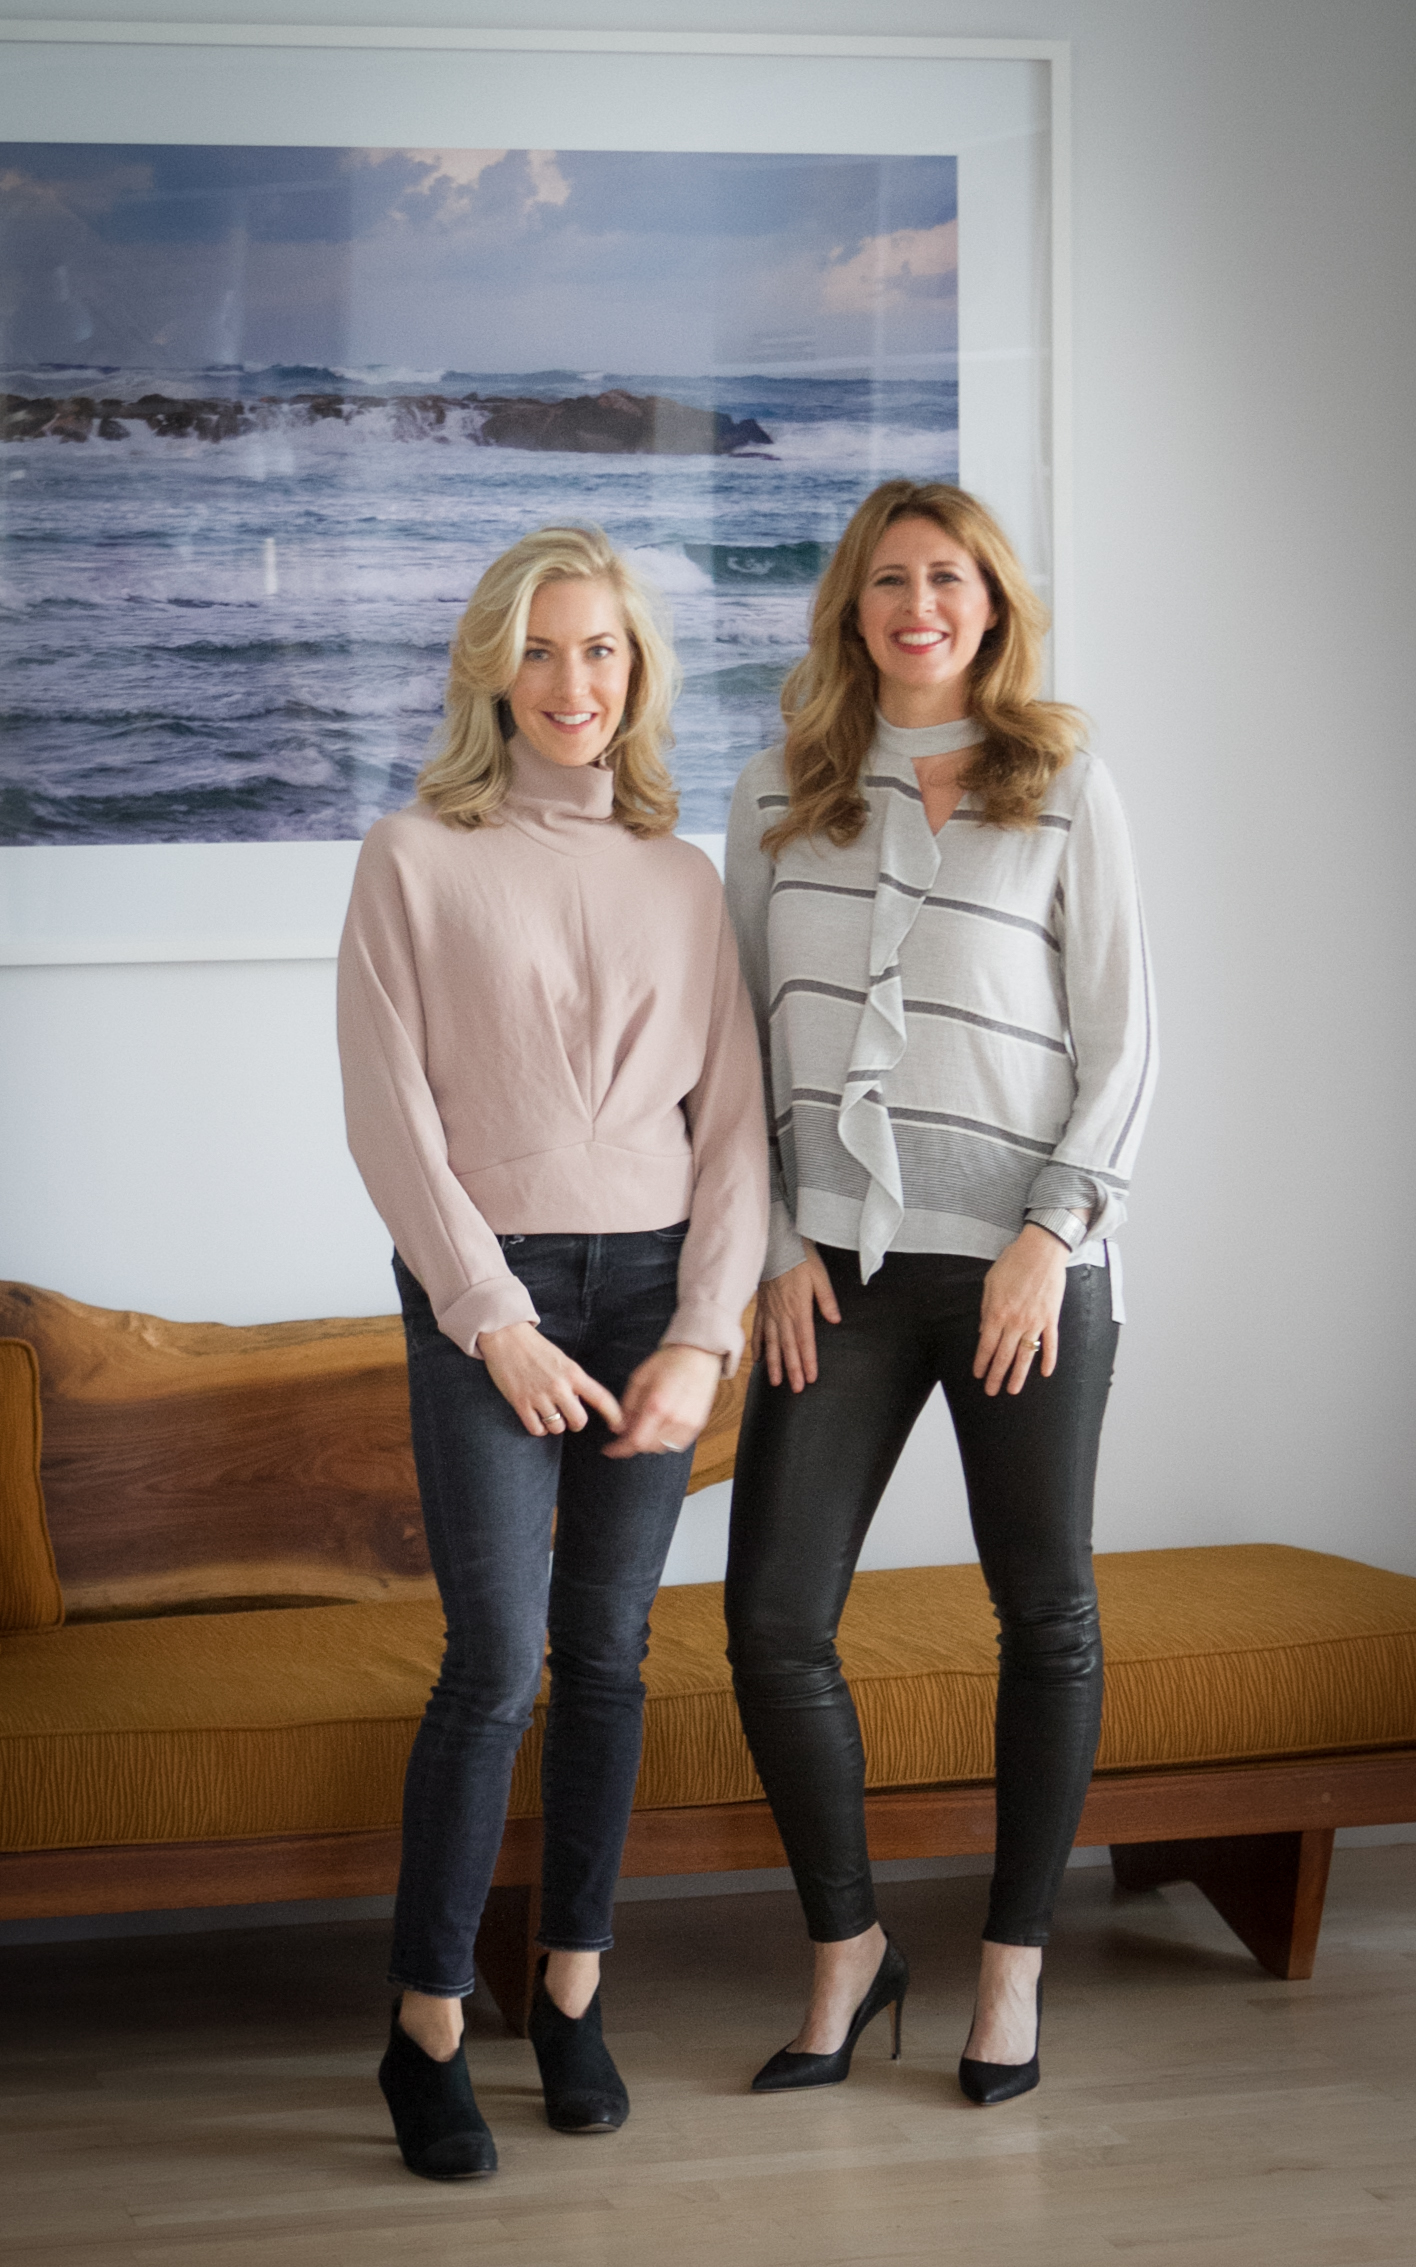 Alexia Brue, Co-Founder and CEO; Melisse Gelula, Co-Founder and Chief Content Officer - Well+Good